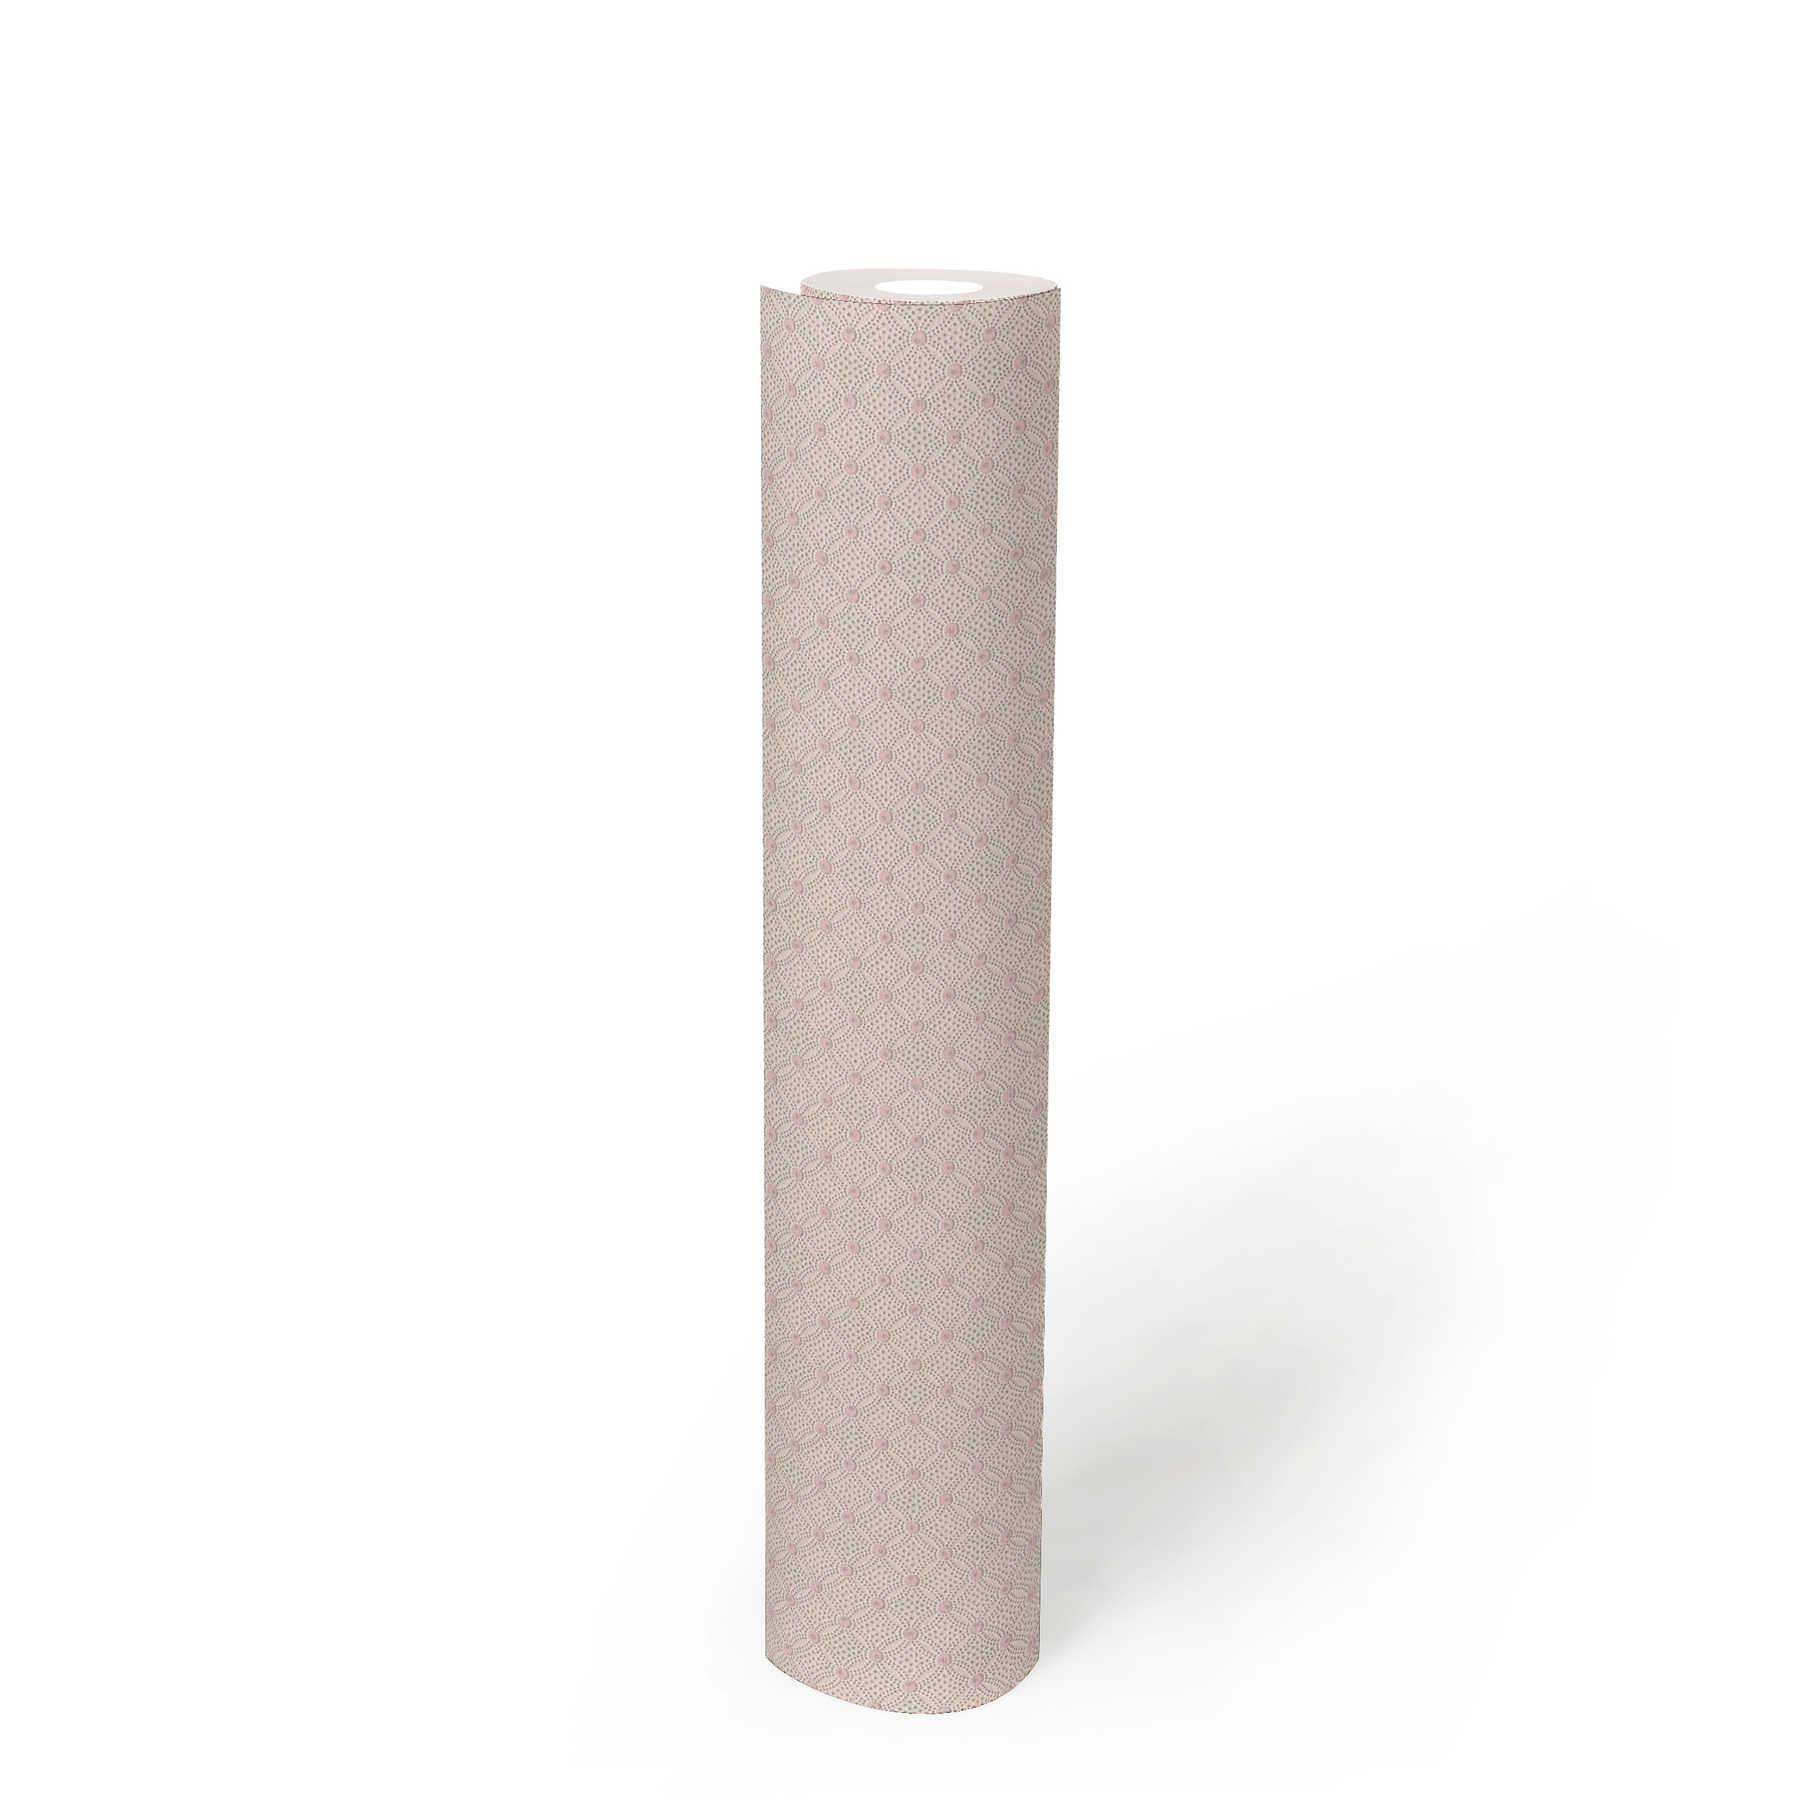             Textured wallpaper with diamond and dots pattern - pink, silver
        